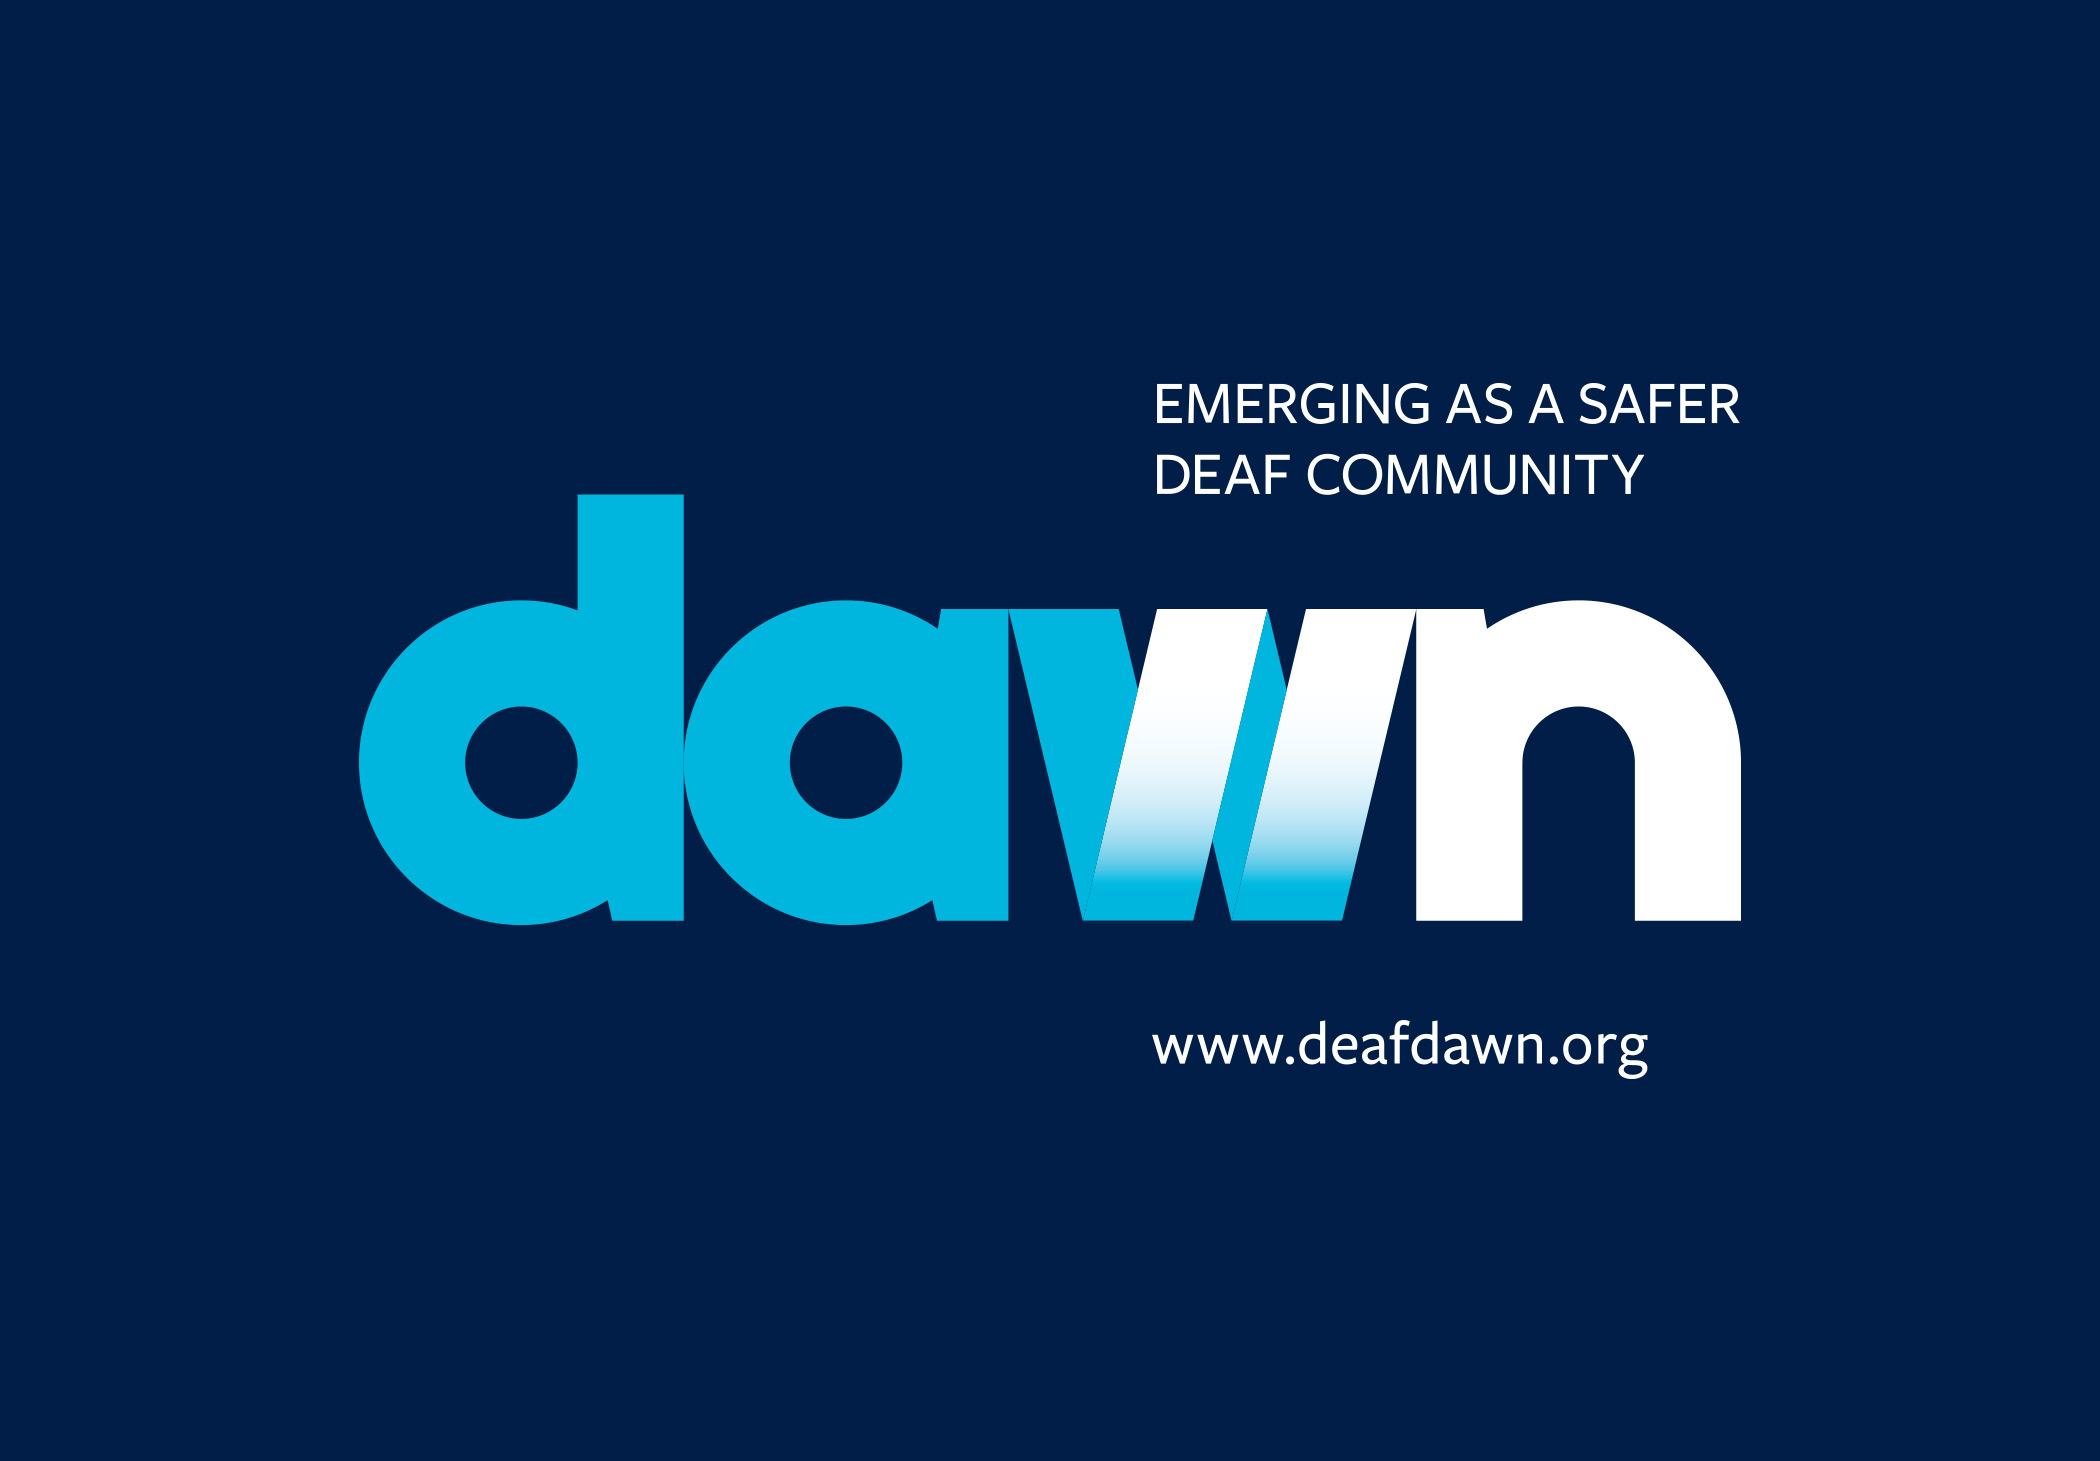 The logotype for the deaf advocacy group Dawn with the tagline, Emerging as a safer deaf community.